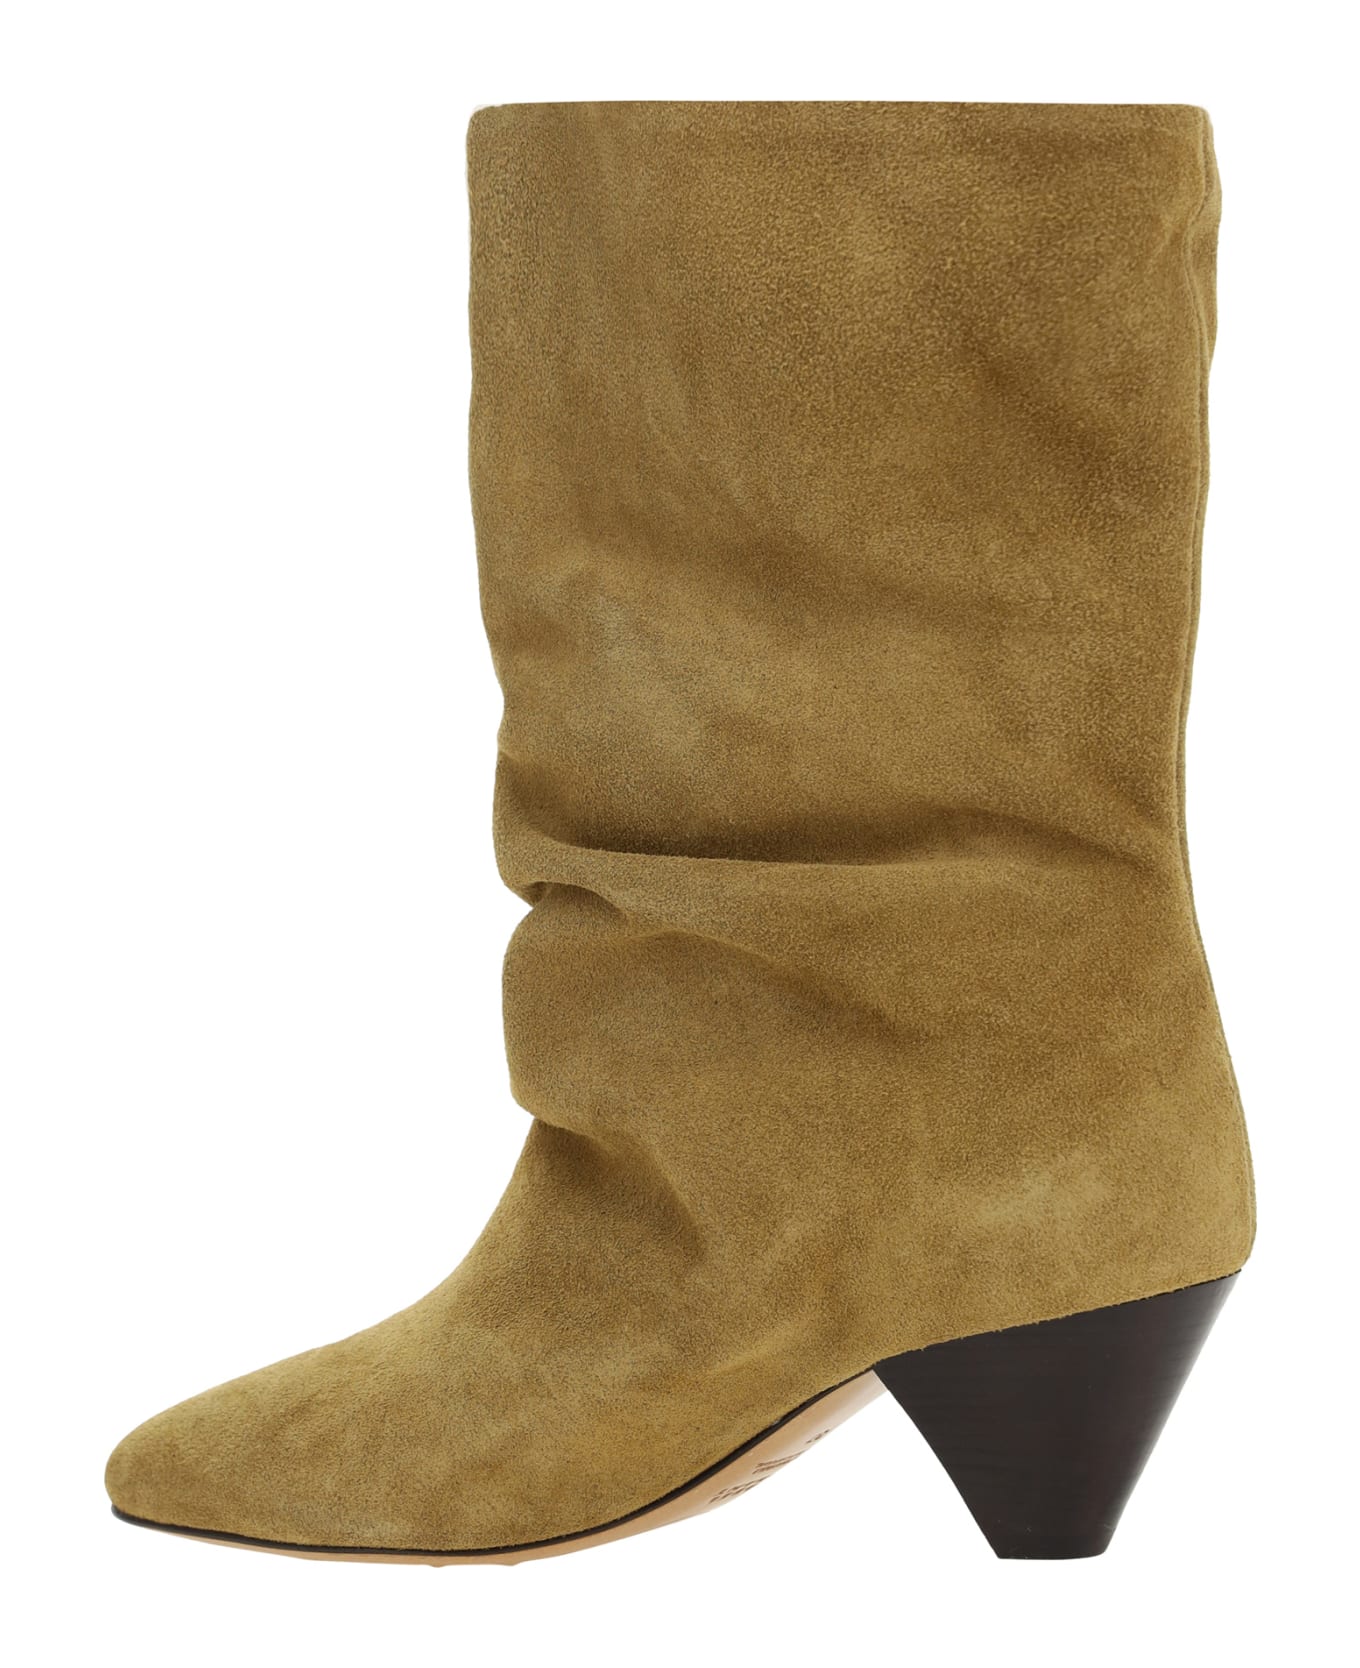 Isabel Marant Reachi Ankle Boots - Brown ブーツ